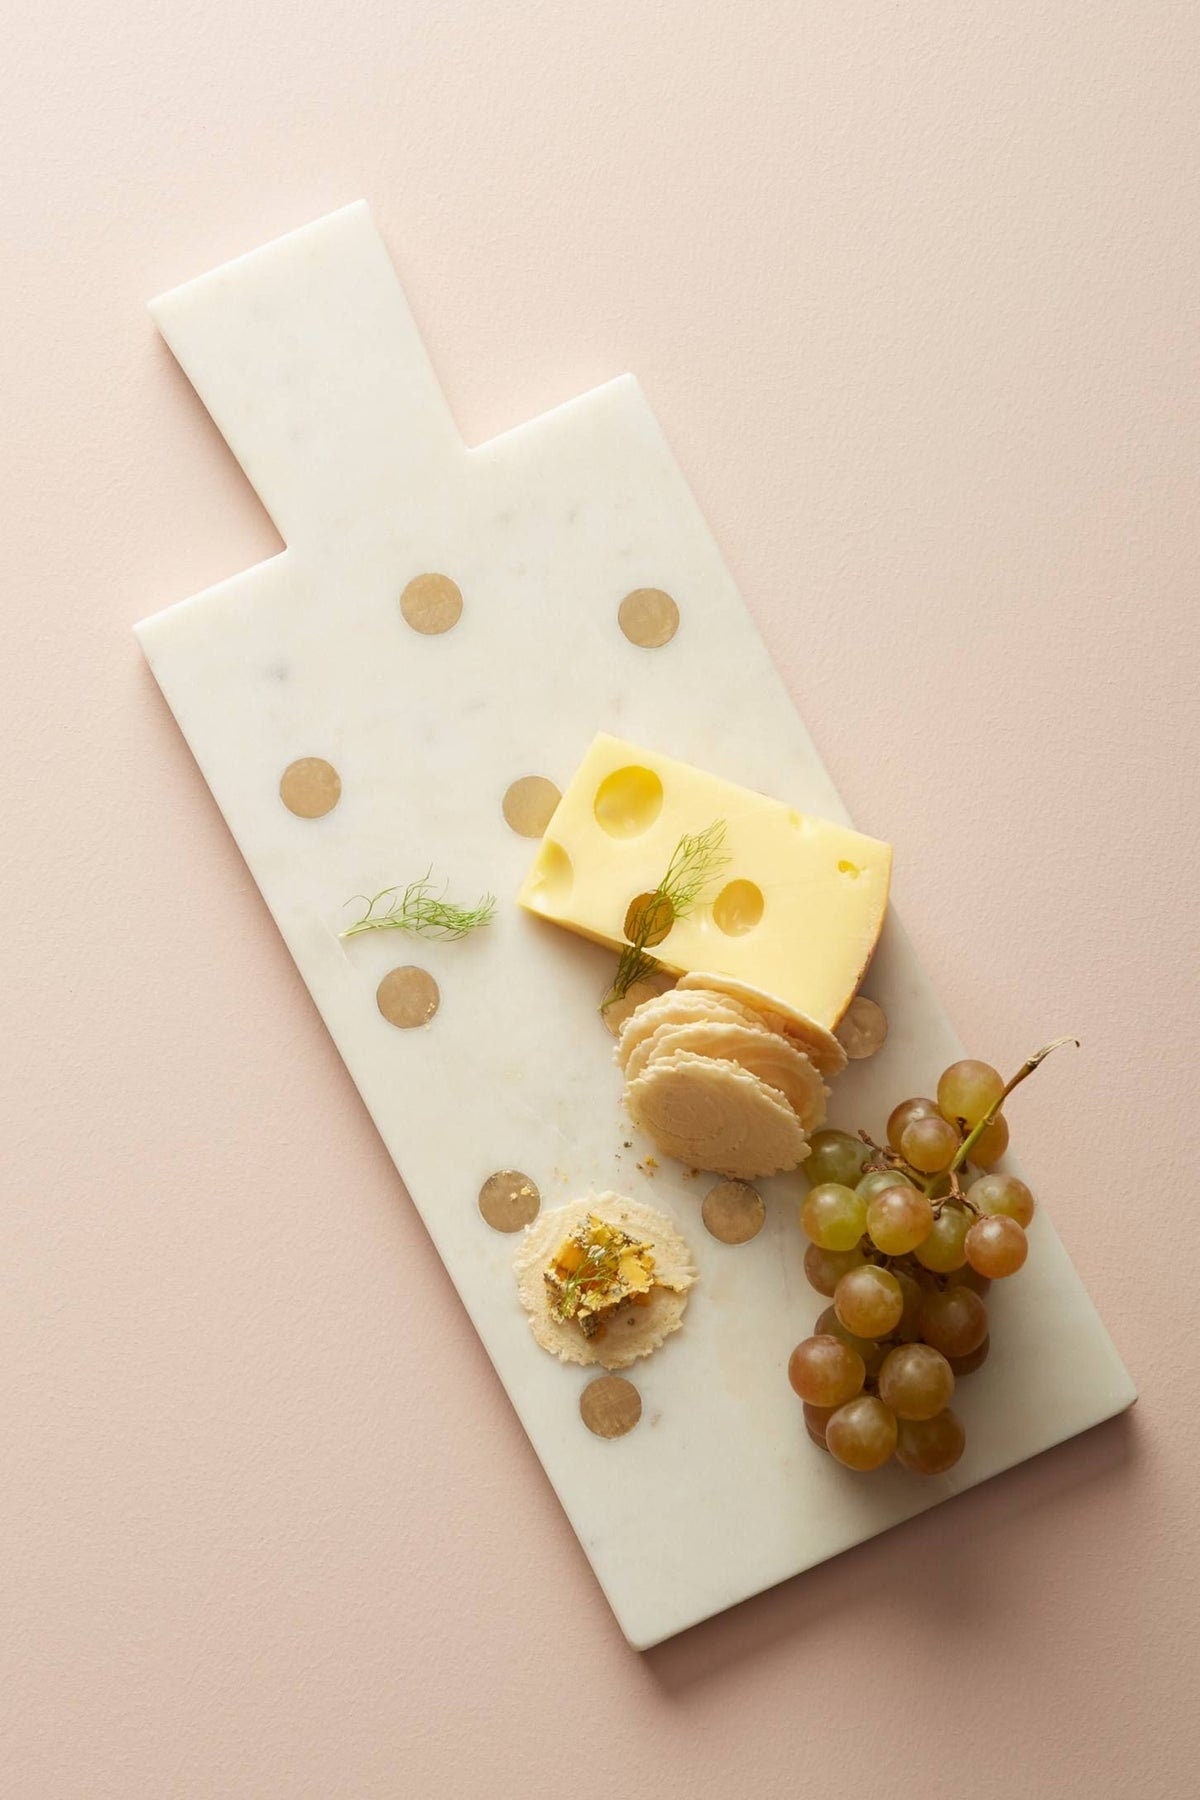 Marble and Gold Tray (17.75" x 7") | White Marble Tray | Marble Charcuterie Board | Marble Cheese Board | Decorative Tray | Serving Tray - DiamondValeDecor